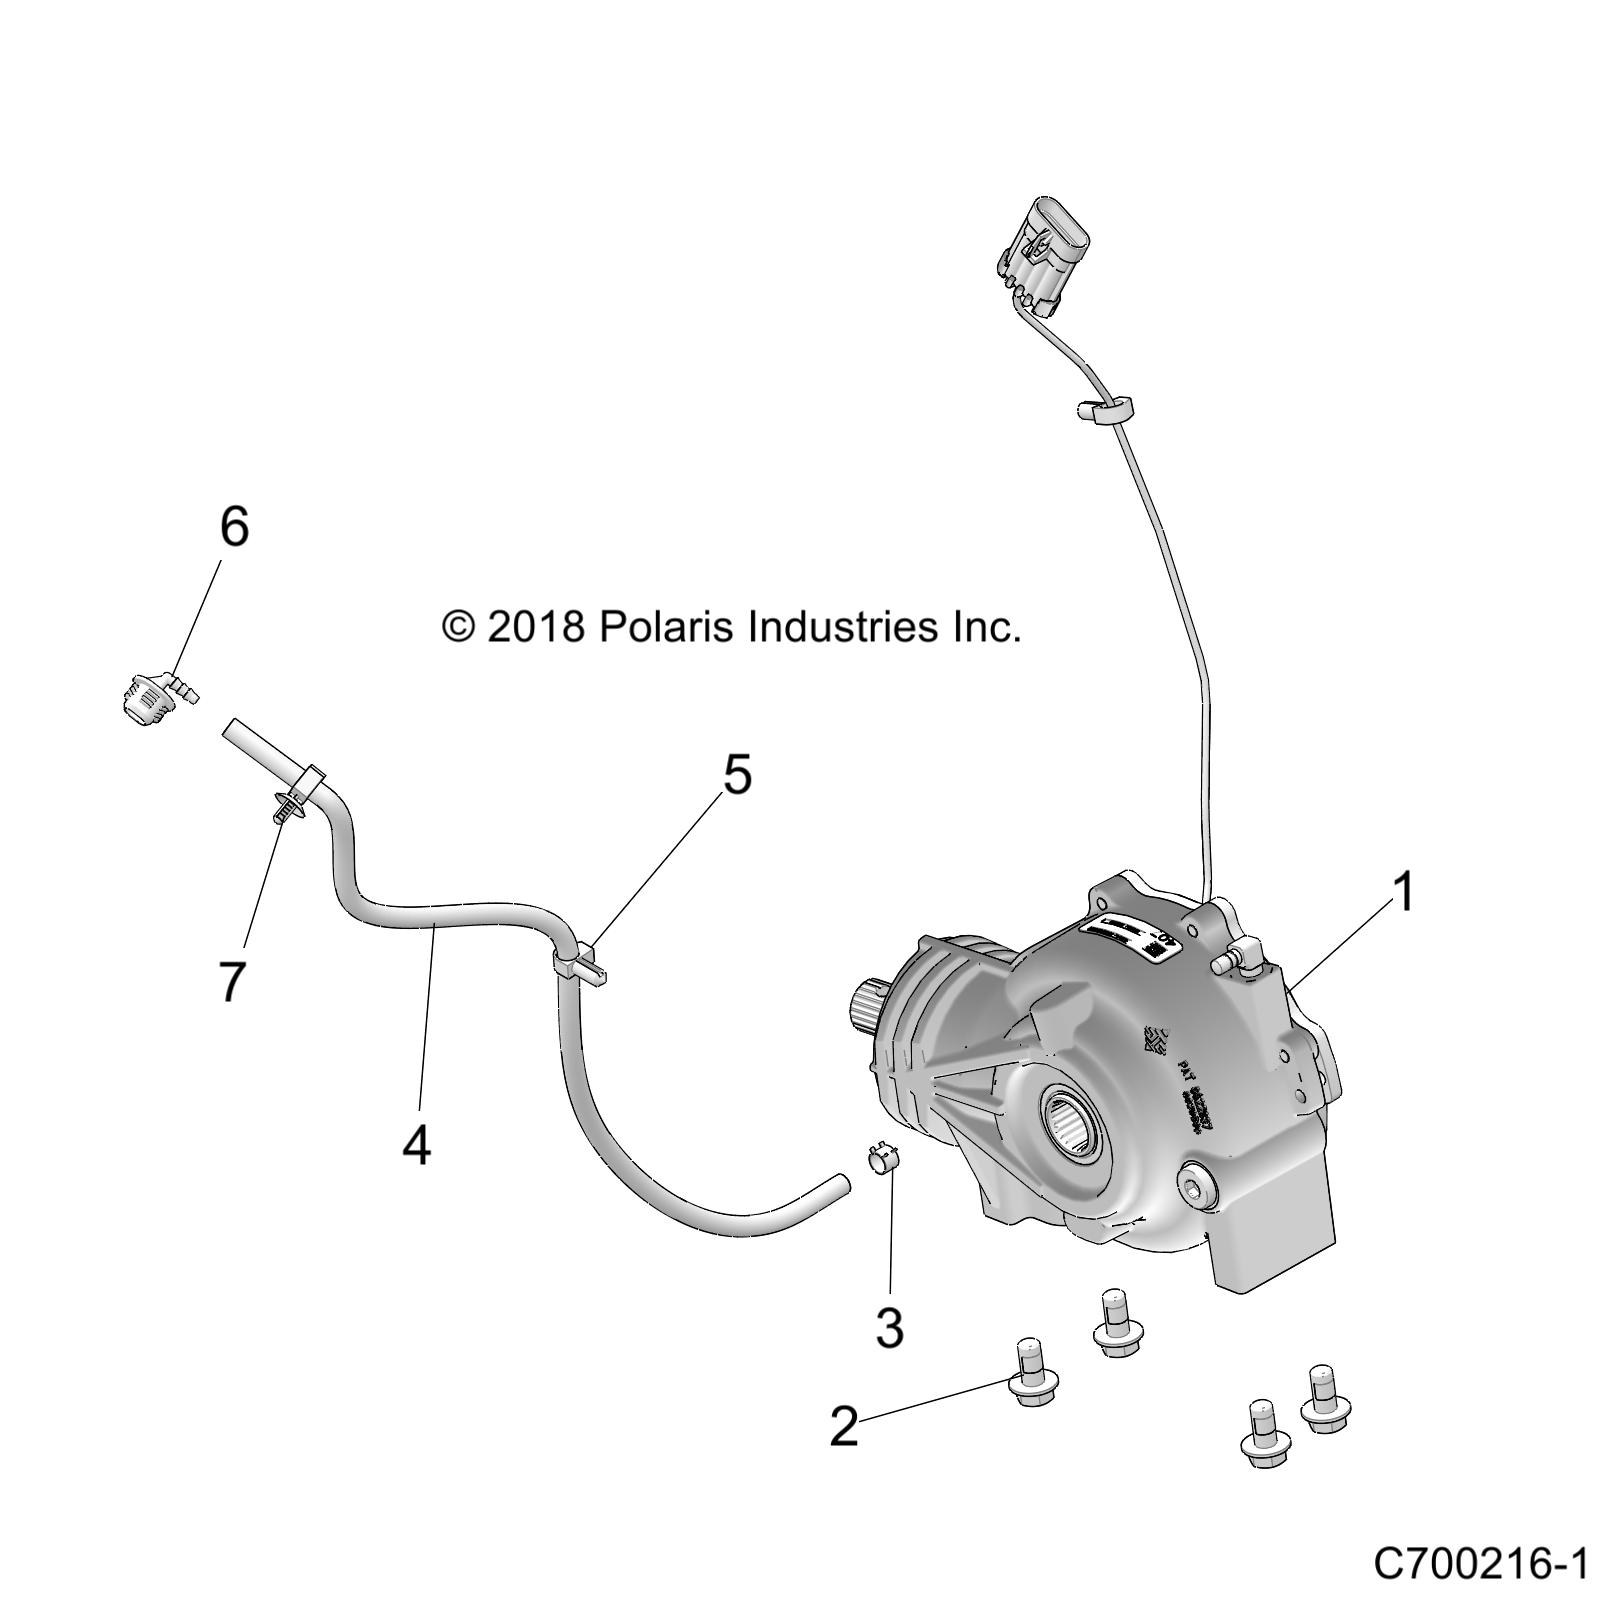 Part Number : 1334266 ASM-GEARCASE FRONT